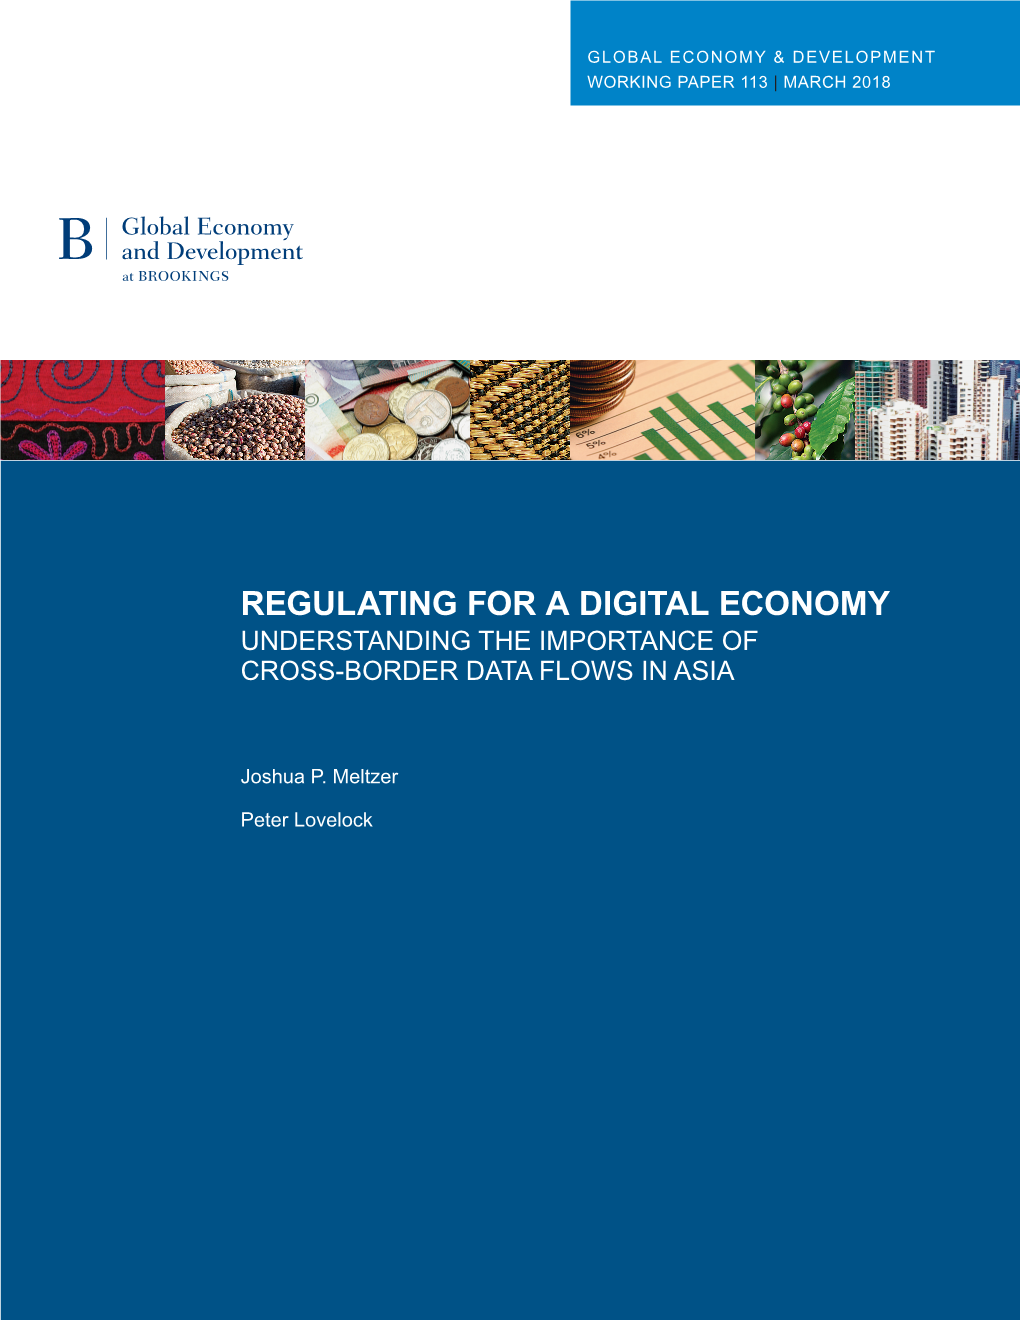 Regulating for a Digital Economy Understanding the Importance of Cross-Border Data Flows in Asia